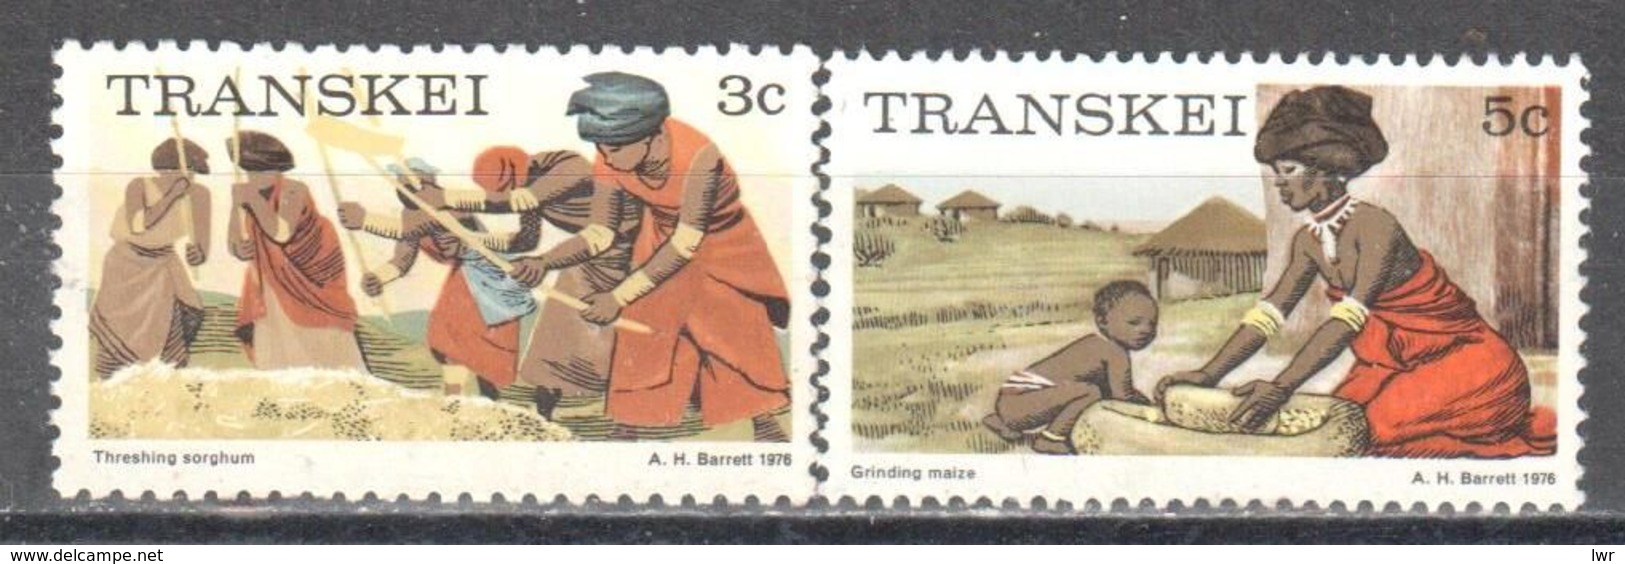 Transkei - Threshing - Grinding - Agriculture - MNH - Agriculture